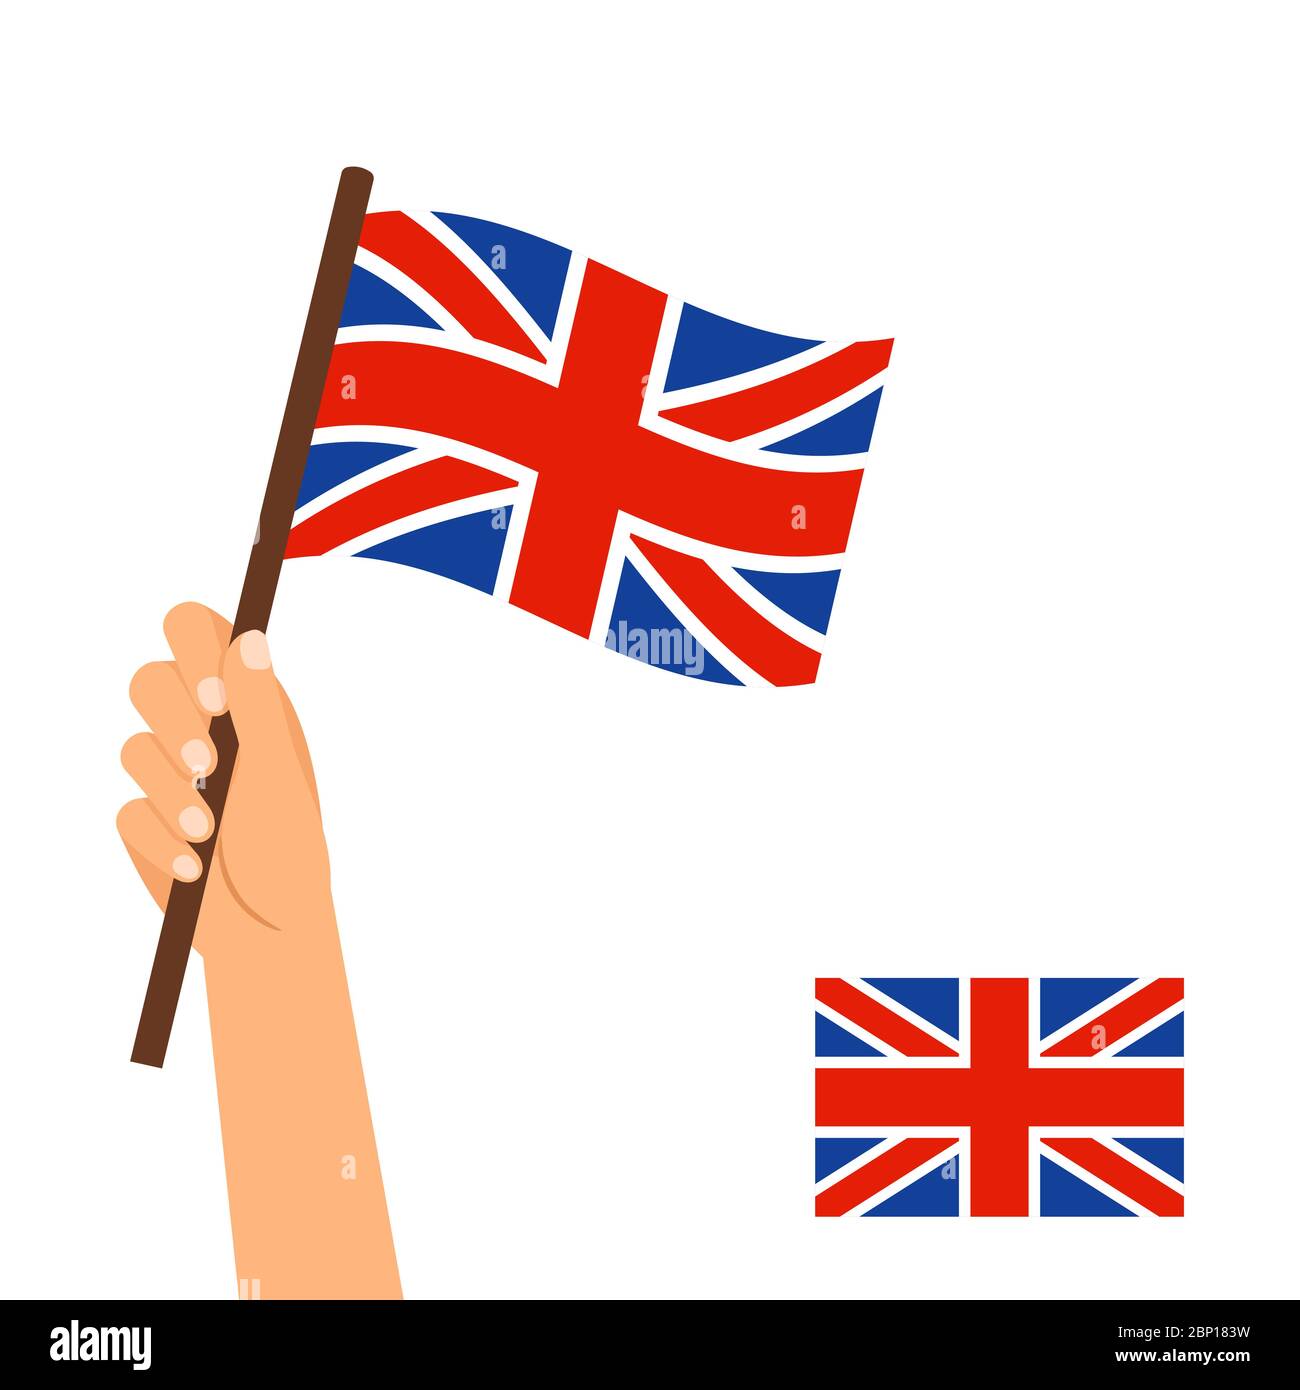 Human hand holding flag of Britain country isolated on white background, vector ilustration Stock Vector